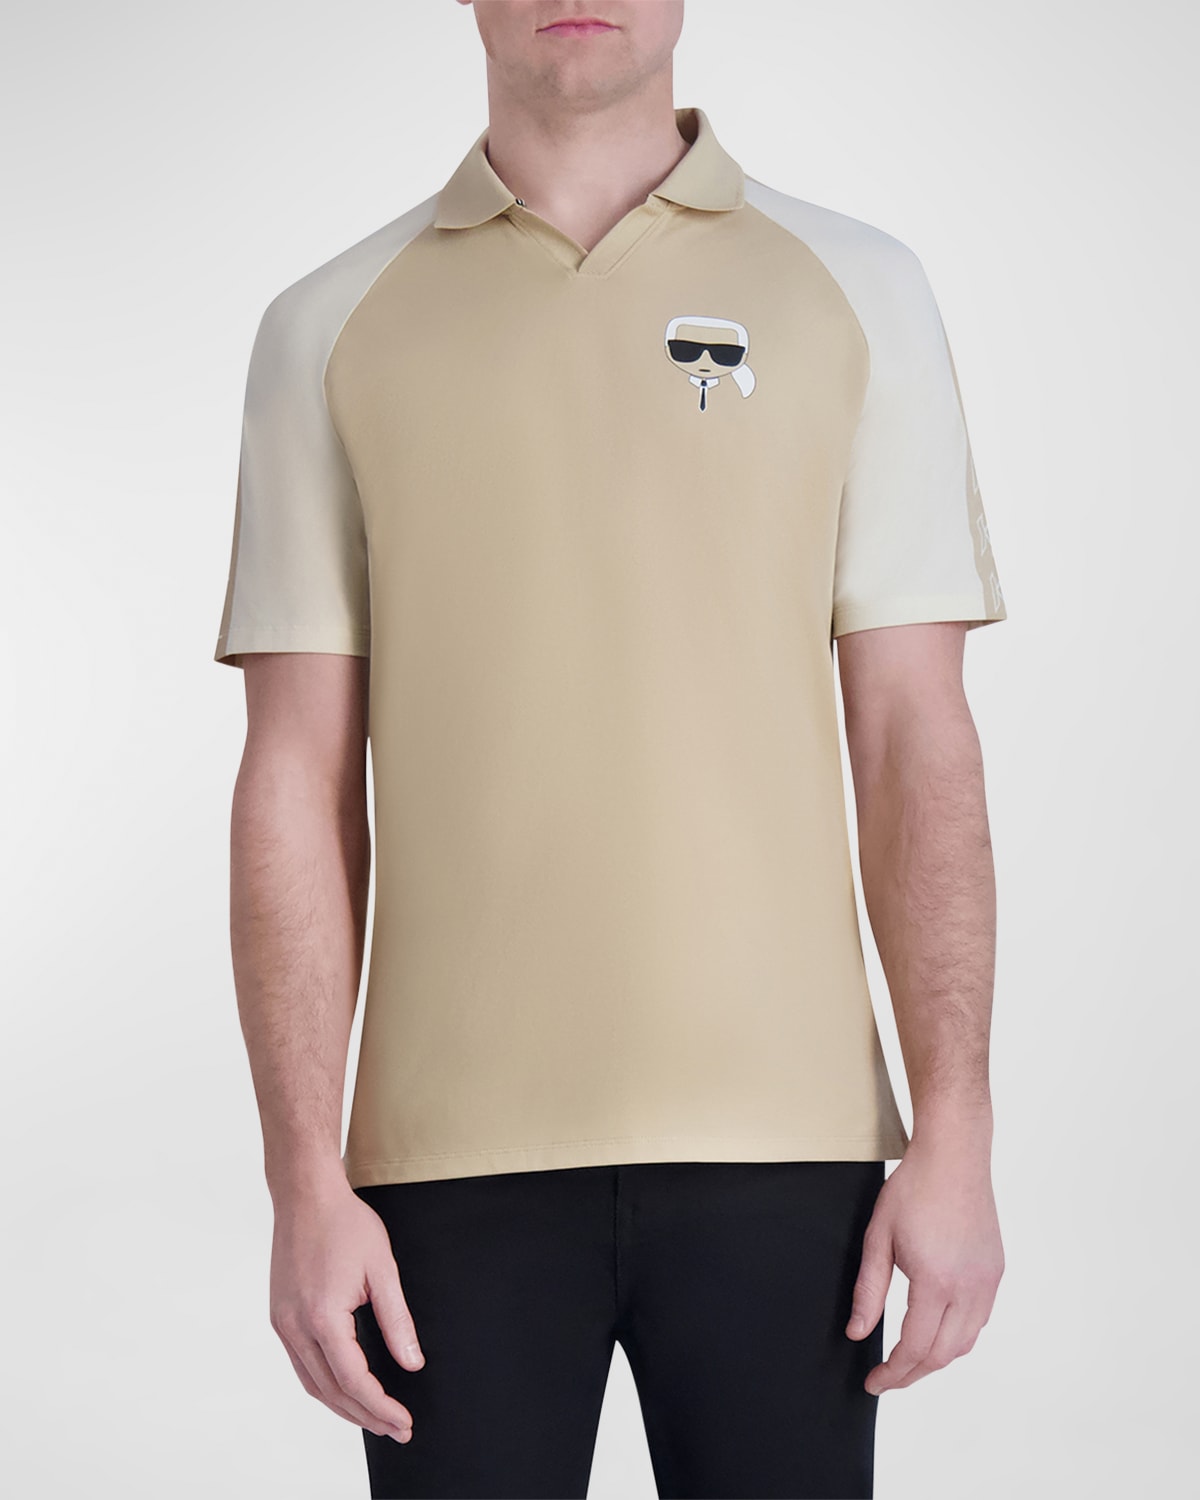 Men's Colorblock Polo Shirt with Johnny Collar